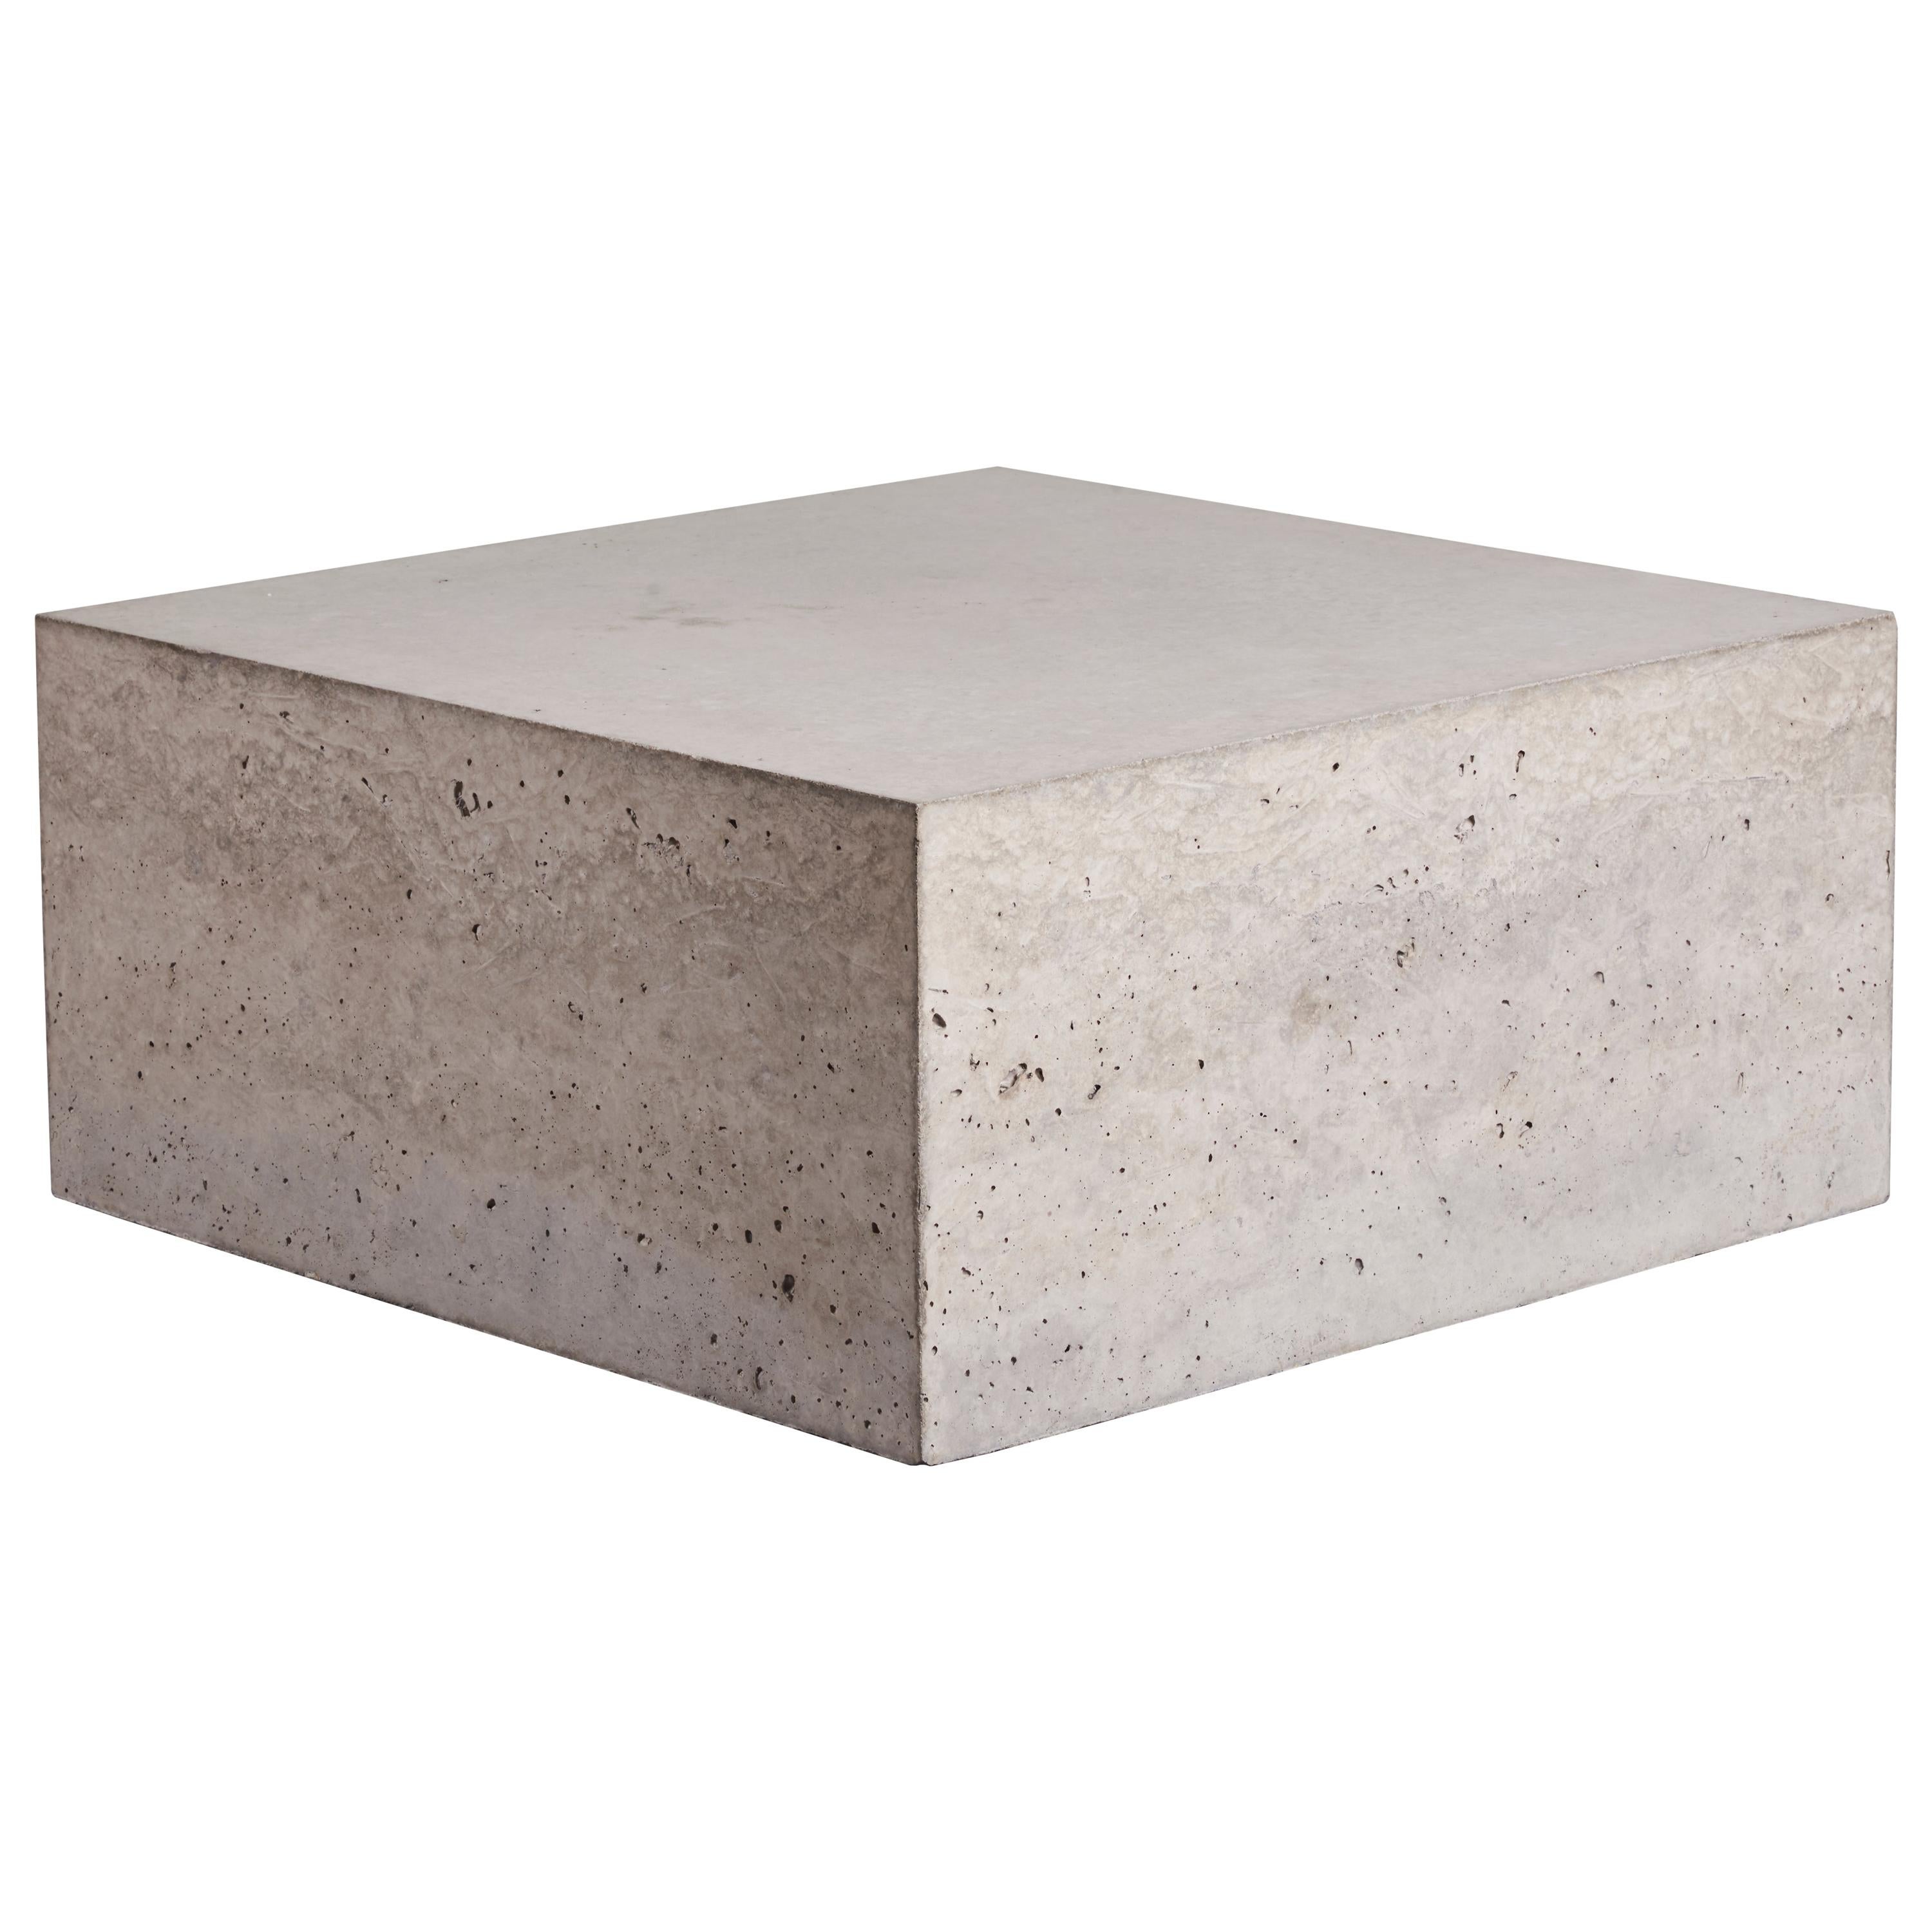 'Ilha' Reinforced Concrete Table, One of a Kind Artwork by Littlewhitehead